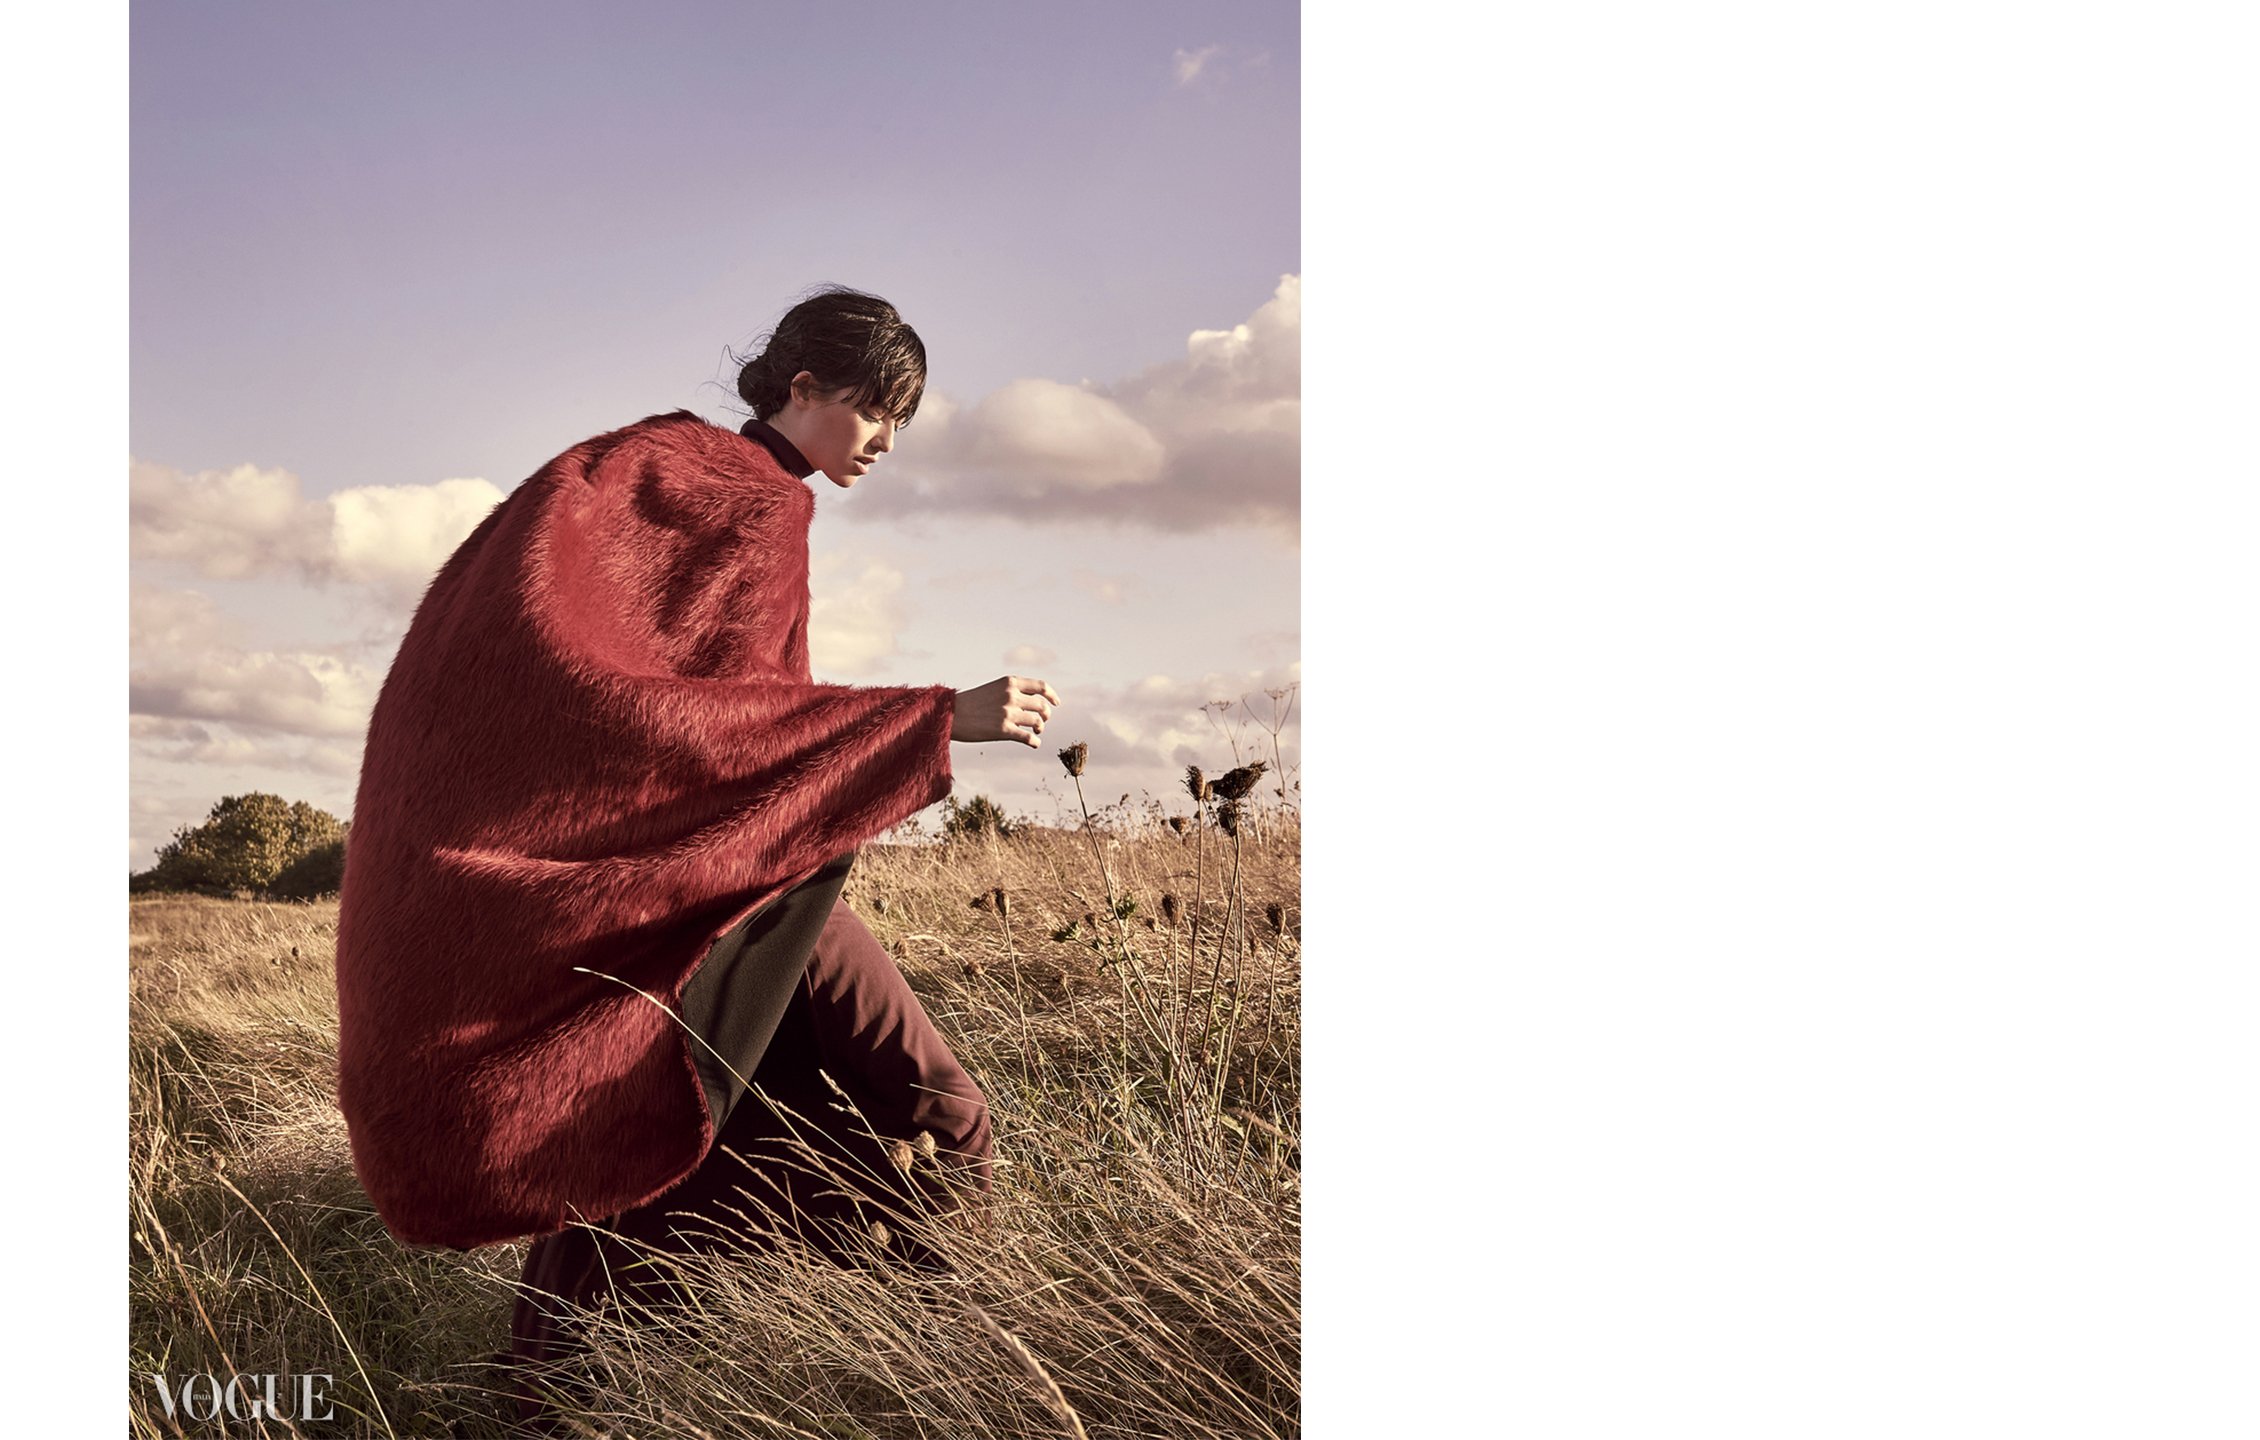  Kingdom of rust  Mitch wearing Roland Mouret Cape  in the Isle of Grain for Mojeh Magazine    Mitch at Select  